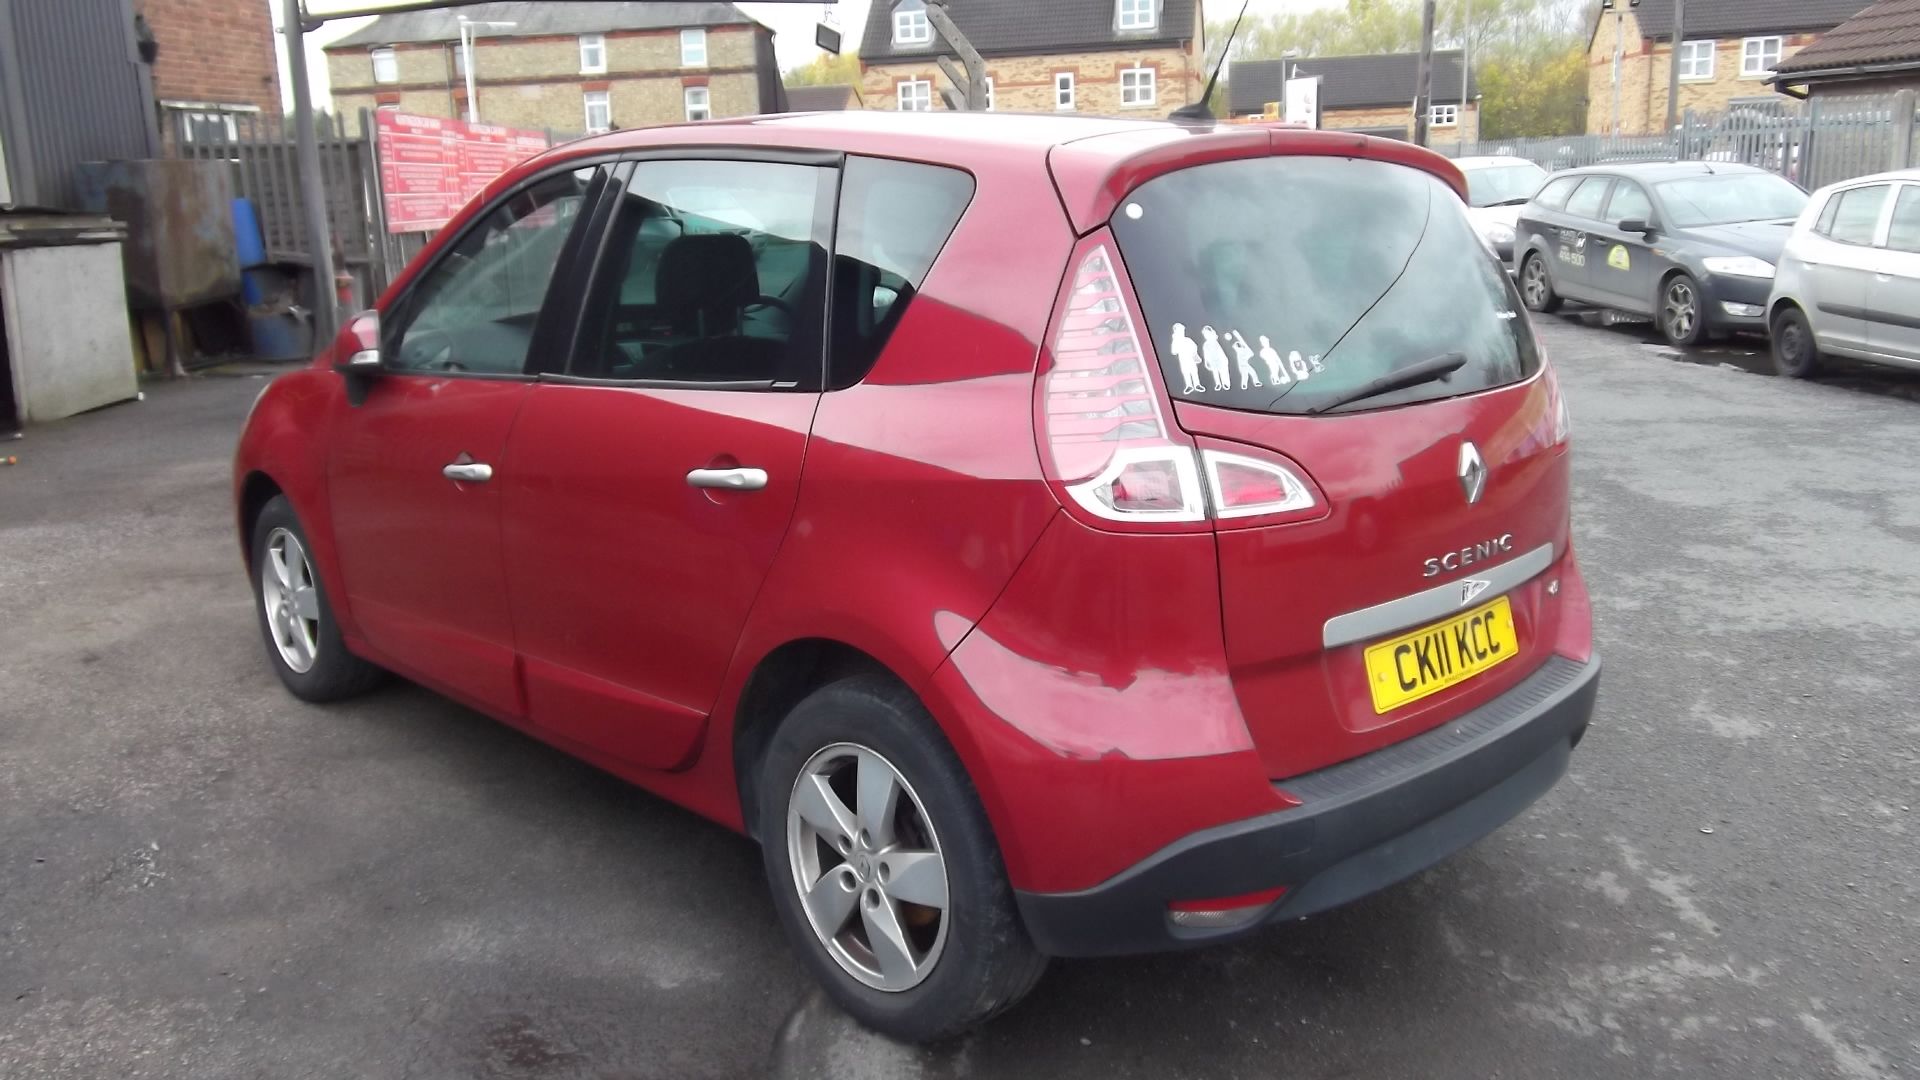 2011 Renault Scenic 1.5 DCI Dynamique Tom Tom 5 Door MPV - Image 10 of 17